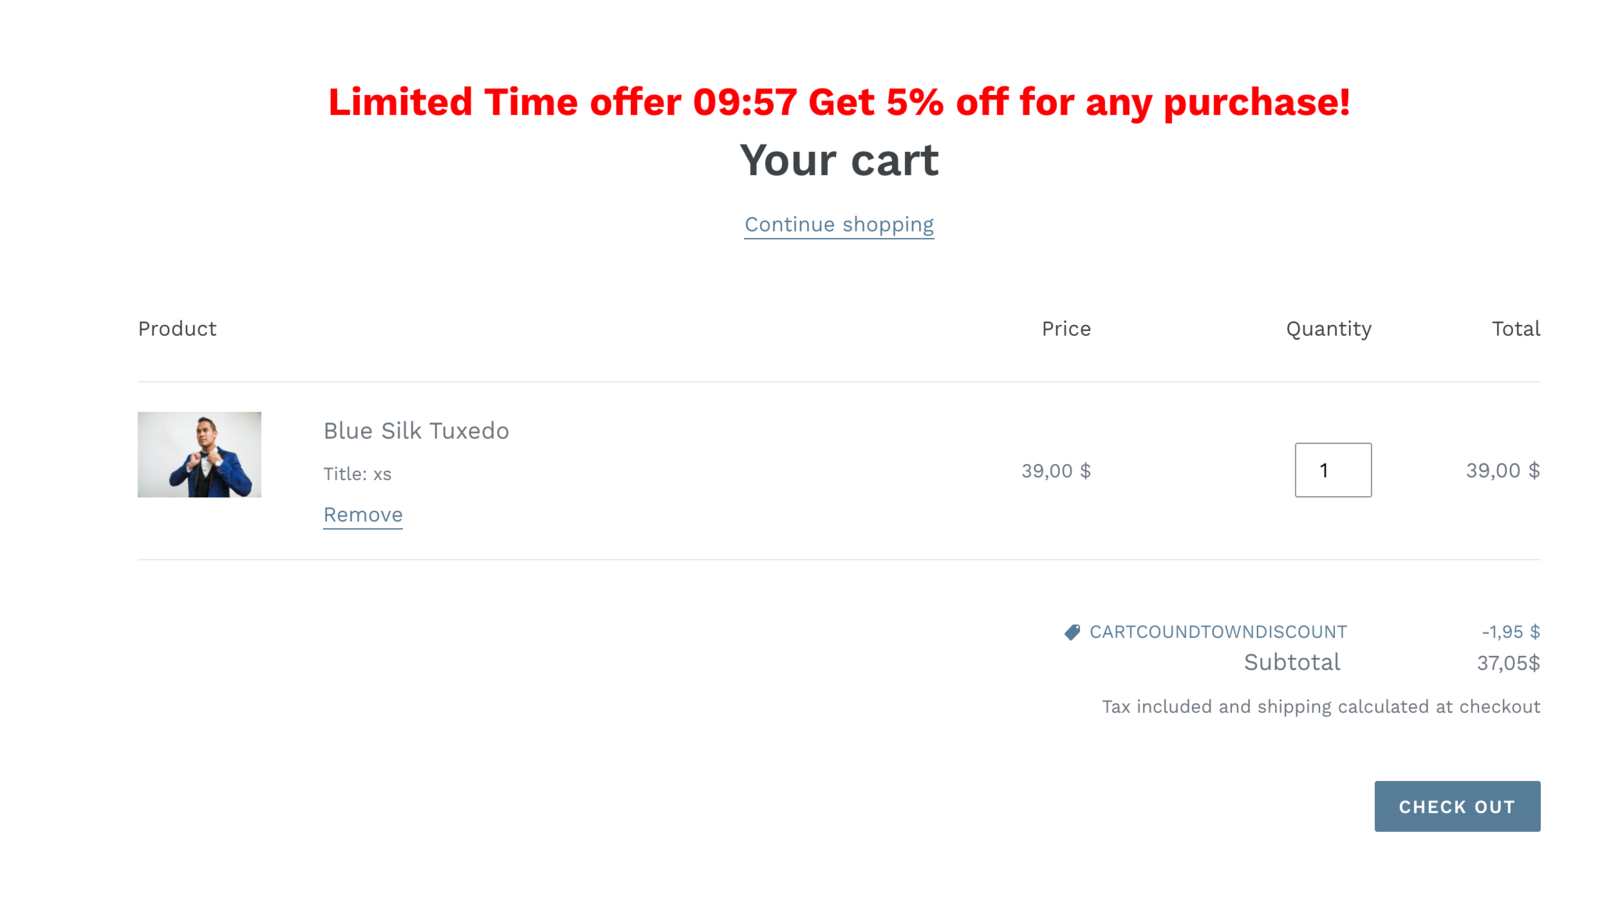 Apply small discounts directly on the cart page